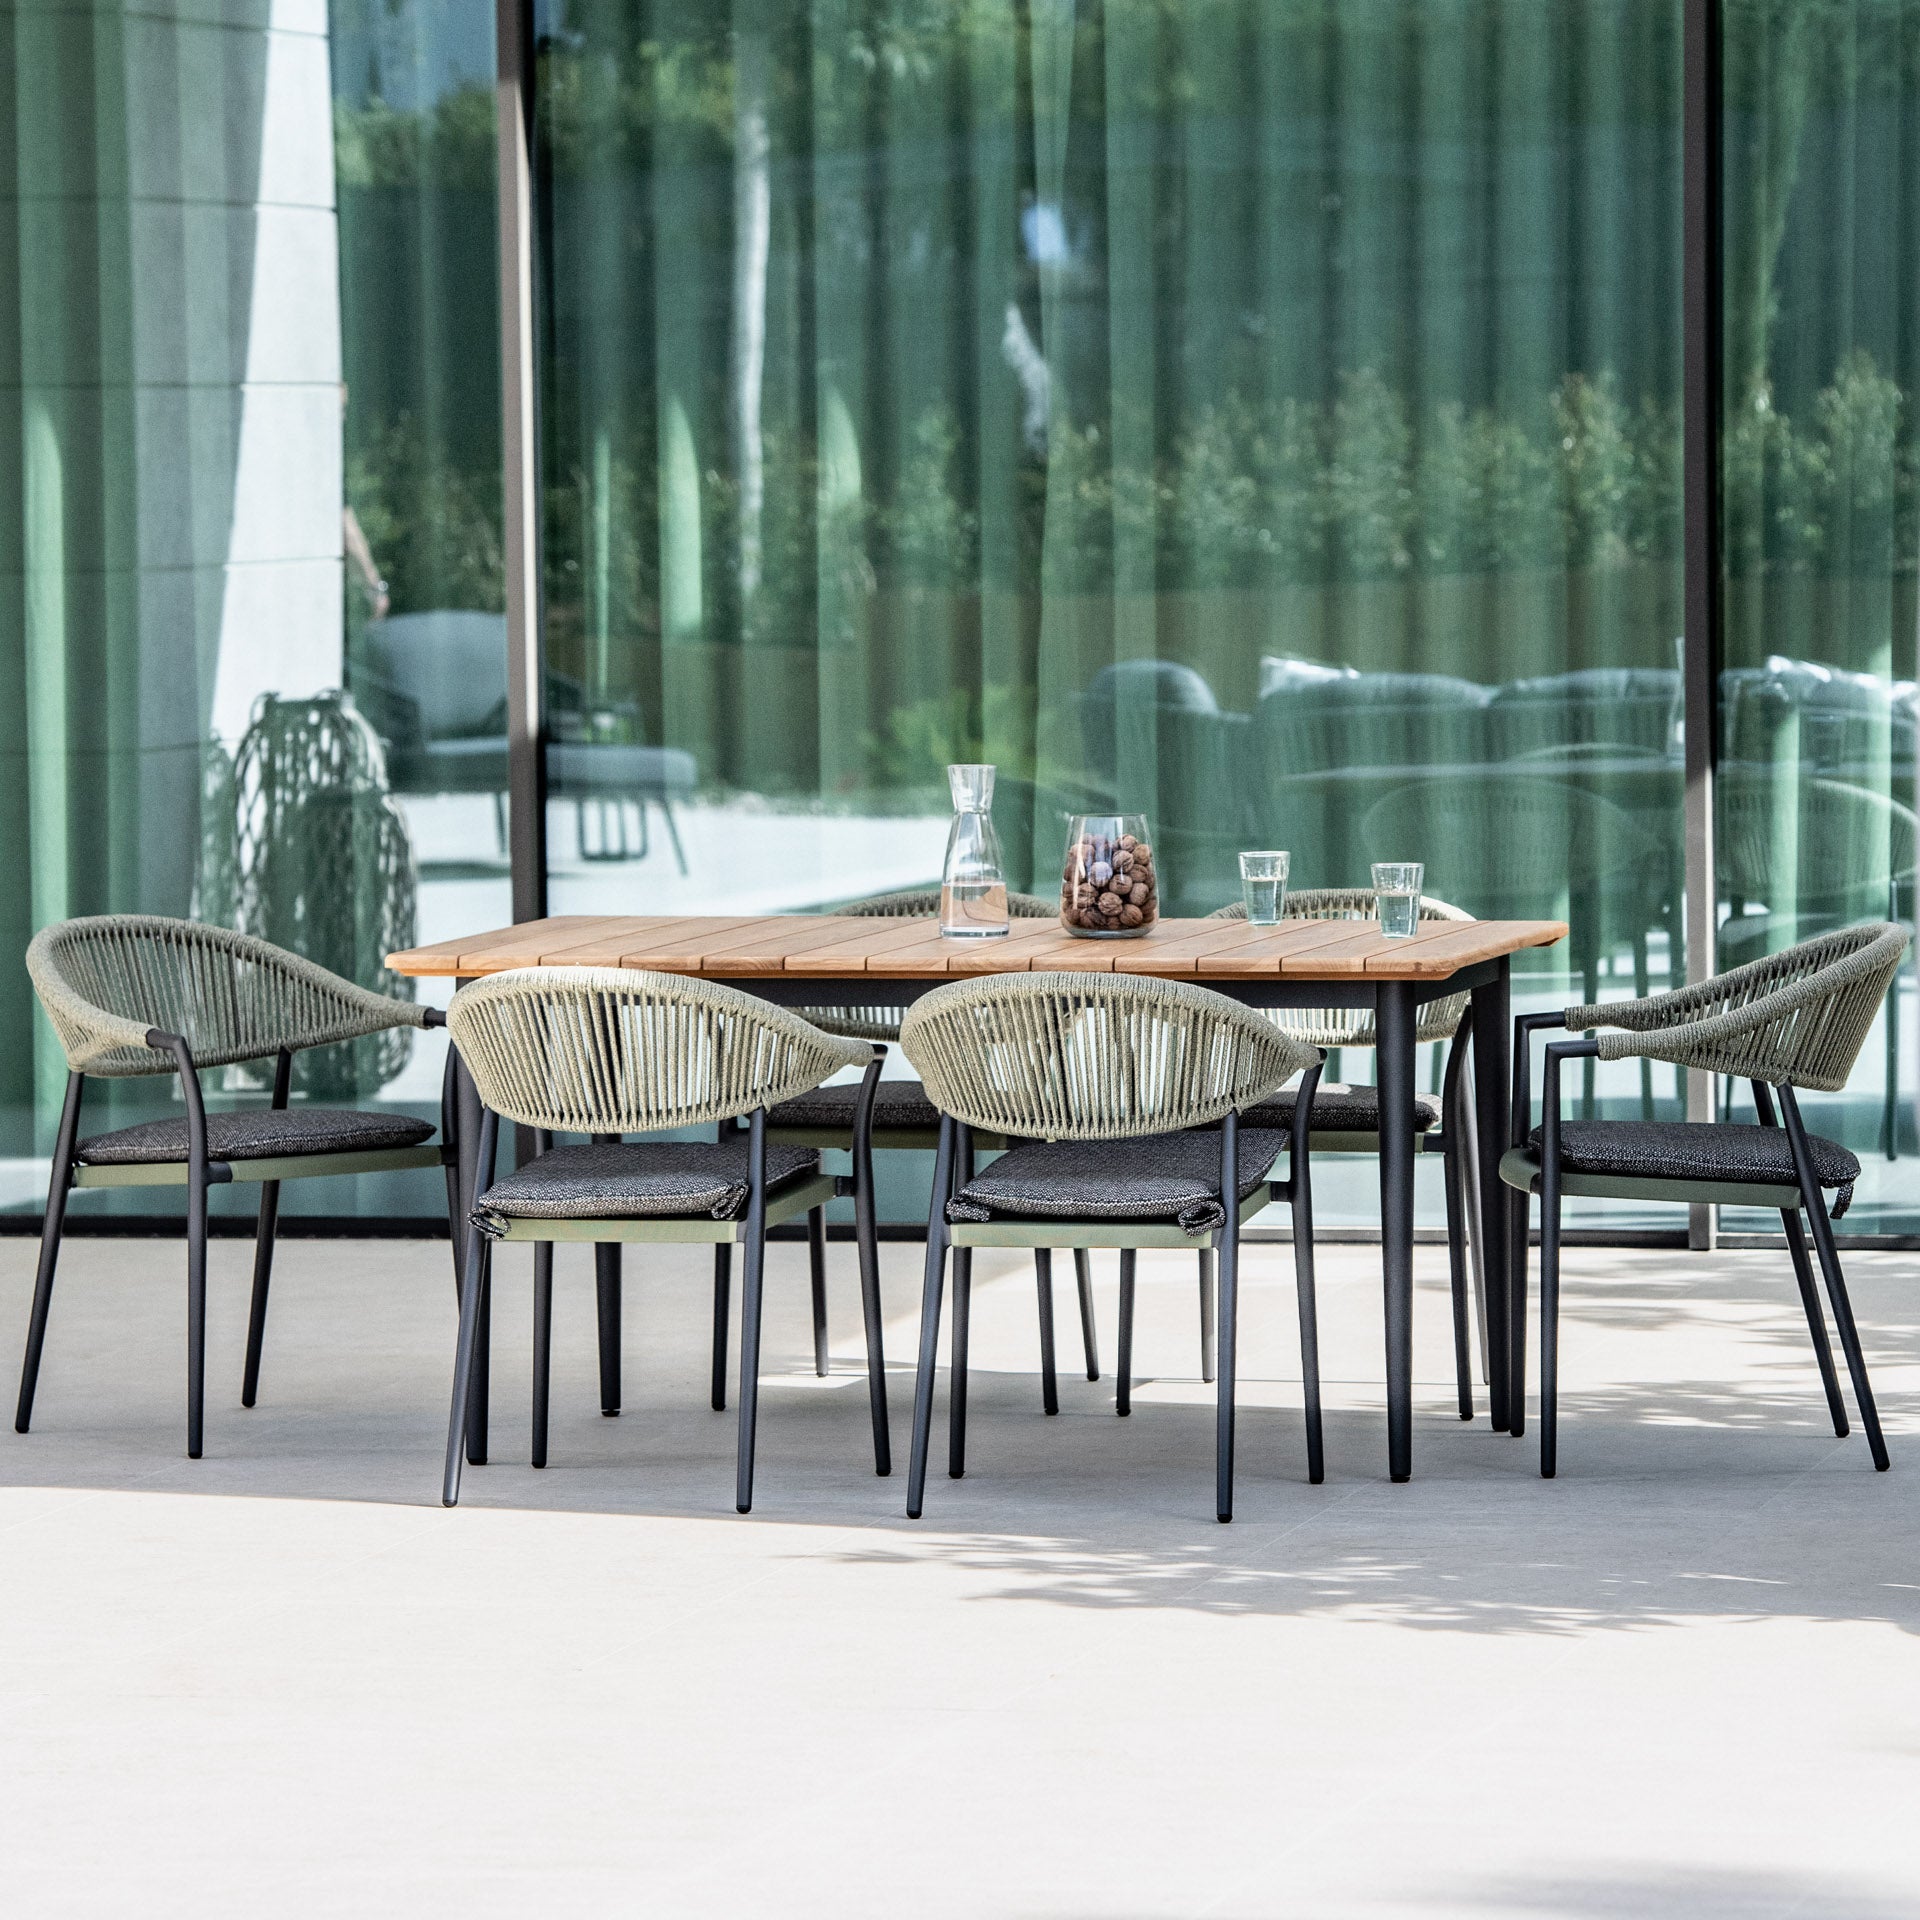 Cloverly 6 Seat Rectangular Dining with Teak Table in Olive Green